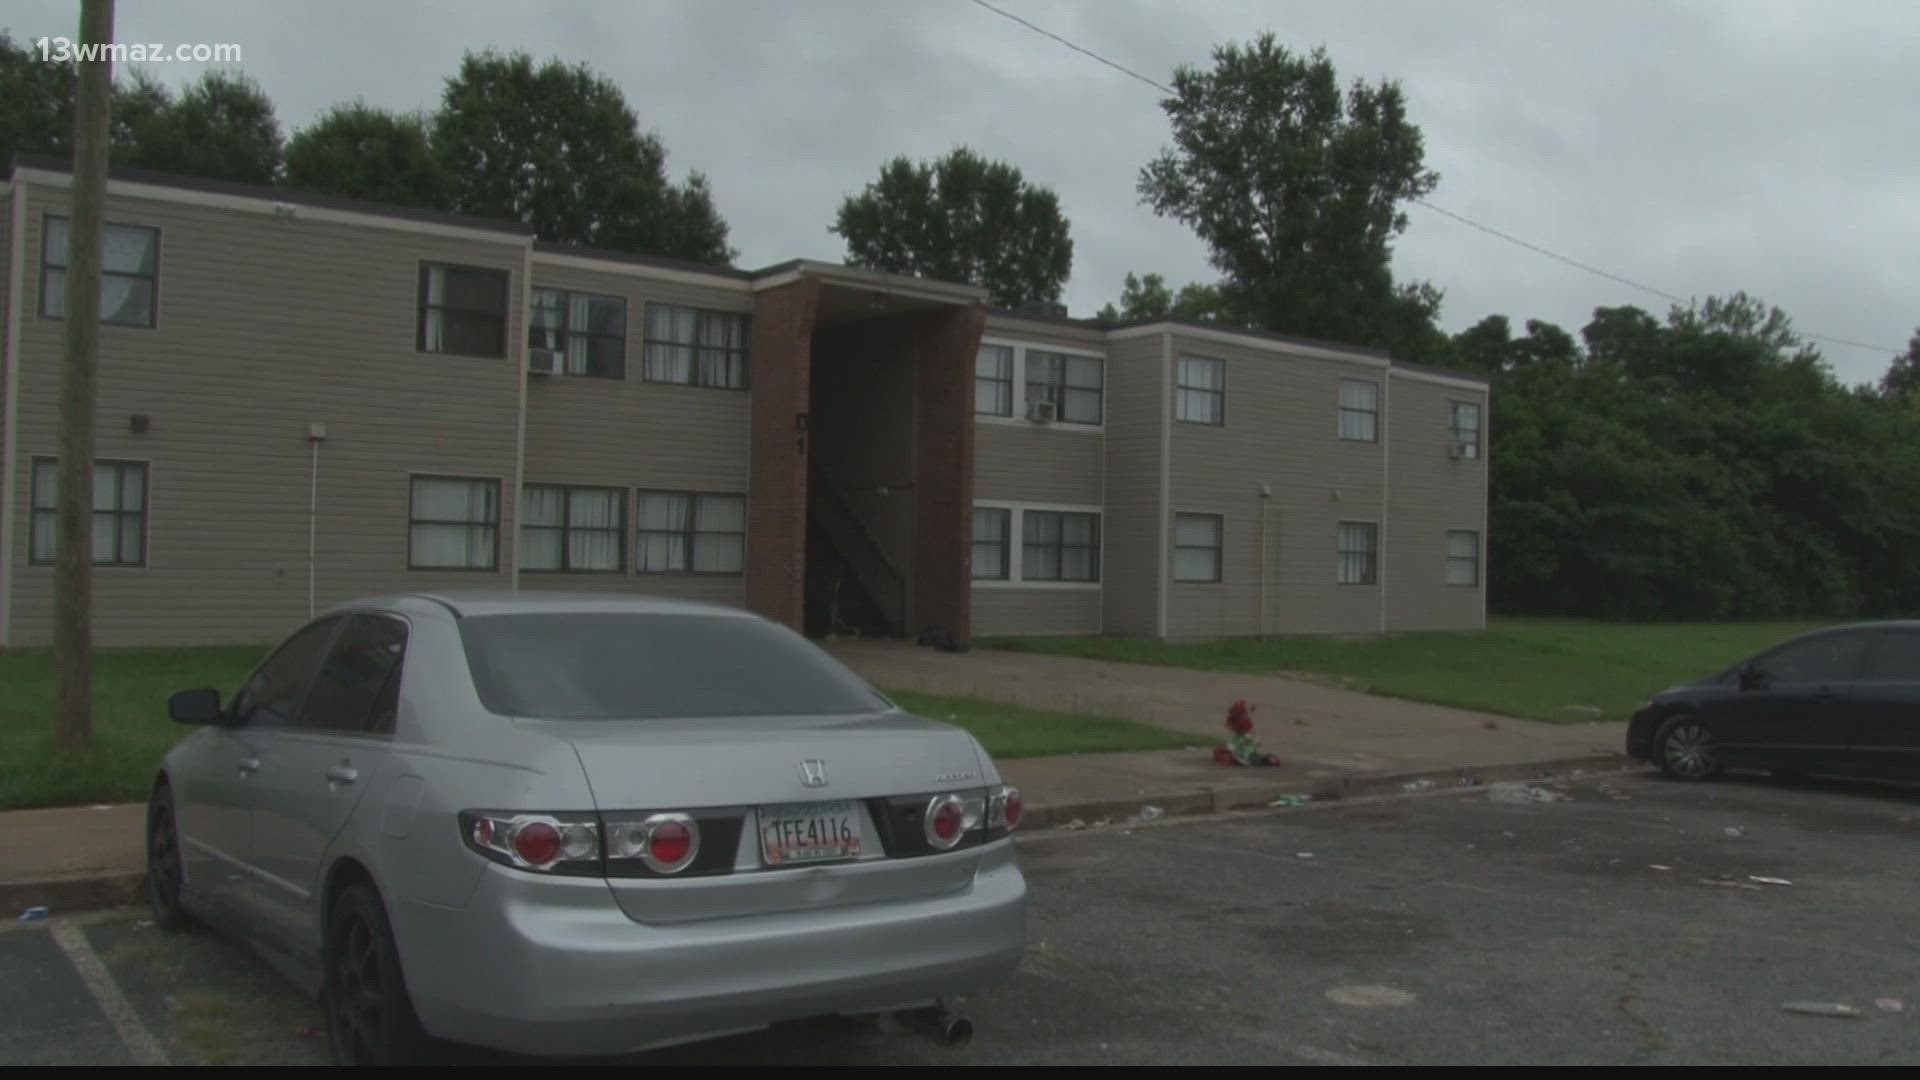 Two Fort Valley toddlers were shot in their bed at the Lakeview Apartments complex Wednesday night.